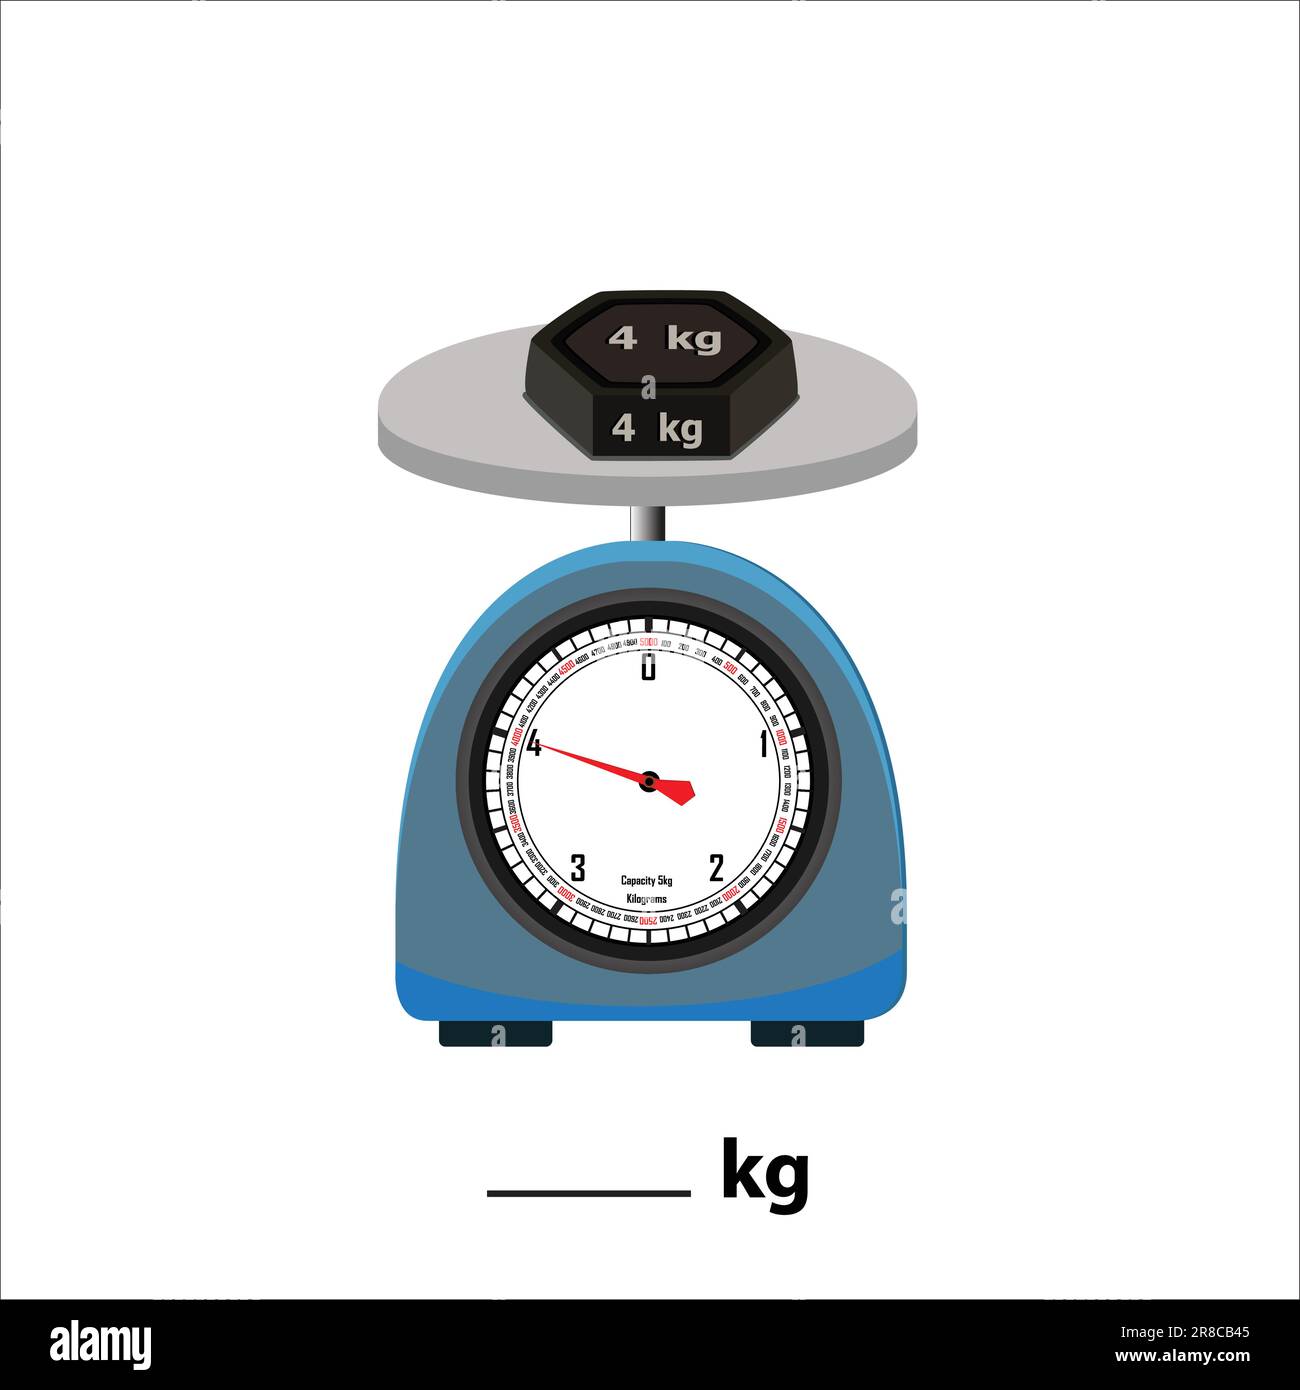 Wight stone 4kg on weighing scale, isolate on white background. Weight balance vector illustration. Equilibrium comparison sign business concept. Stock Vector